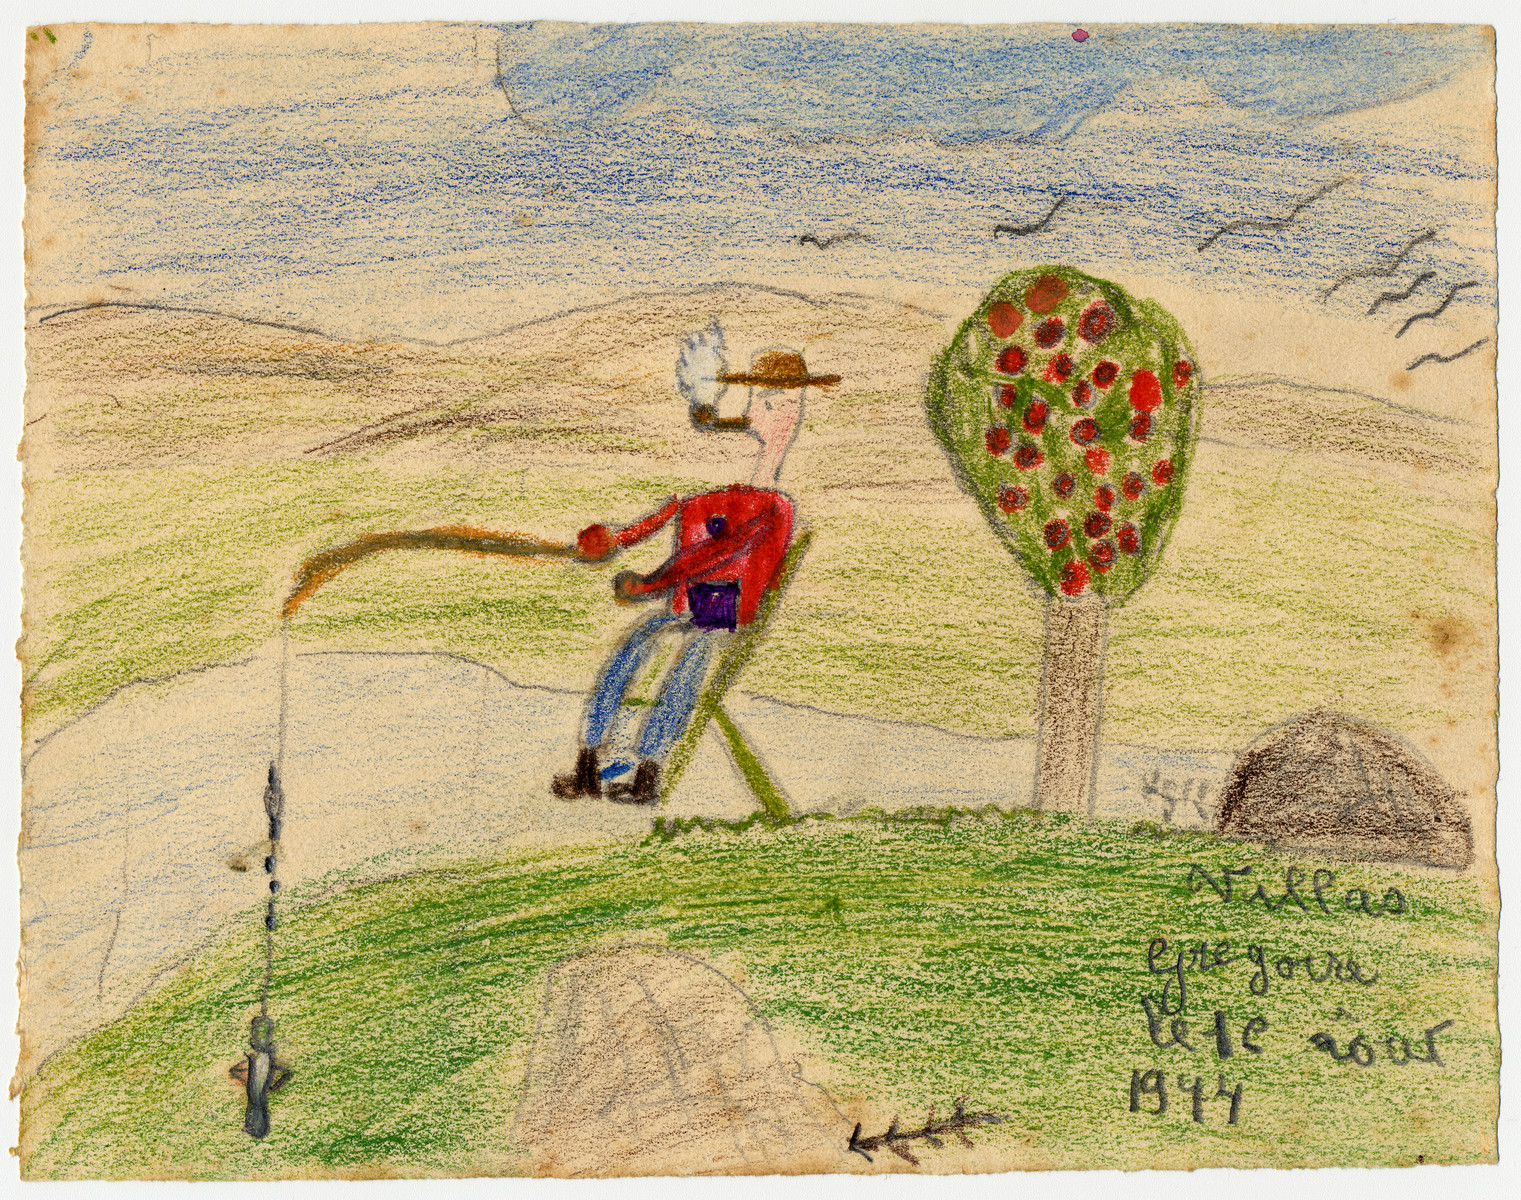 A child's drawing of a man going fishing created by a child in Chateau de la Hille.